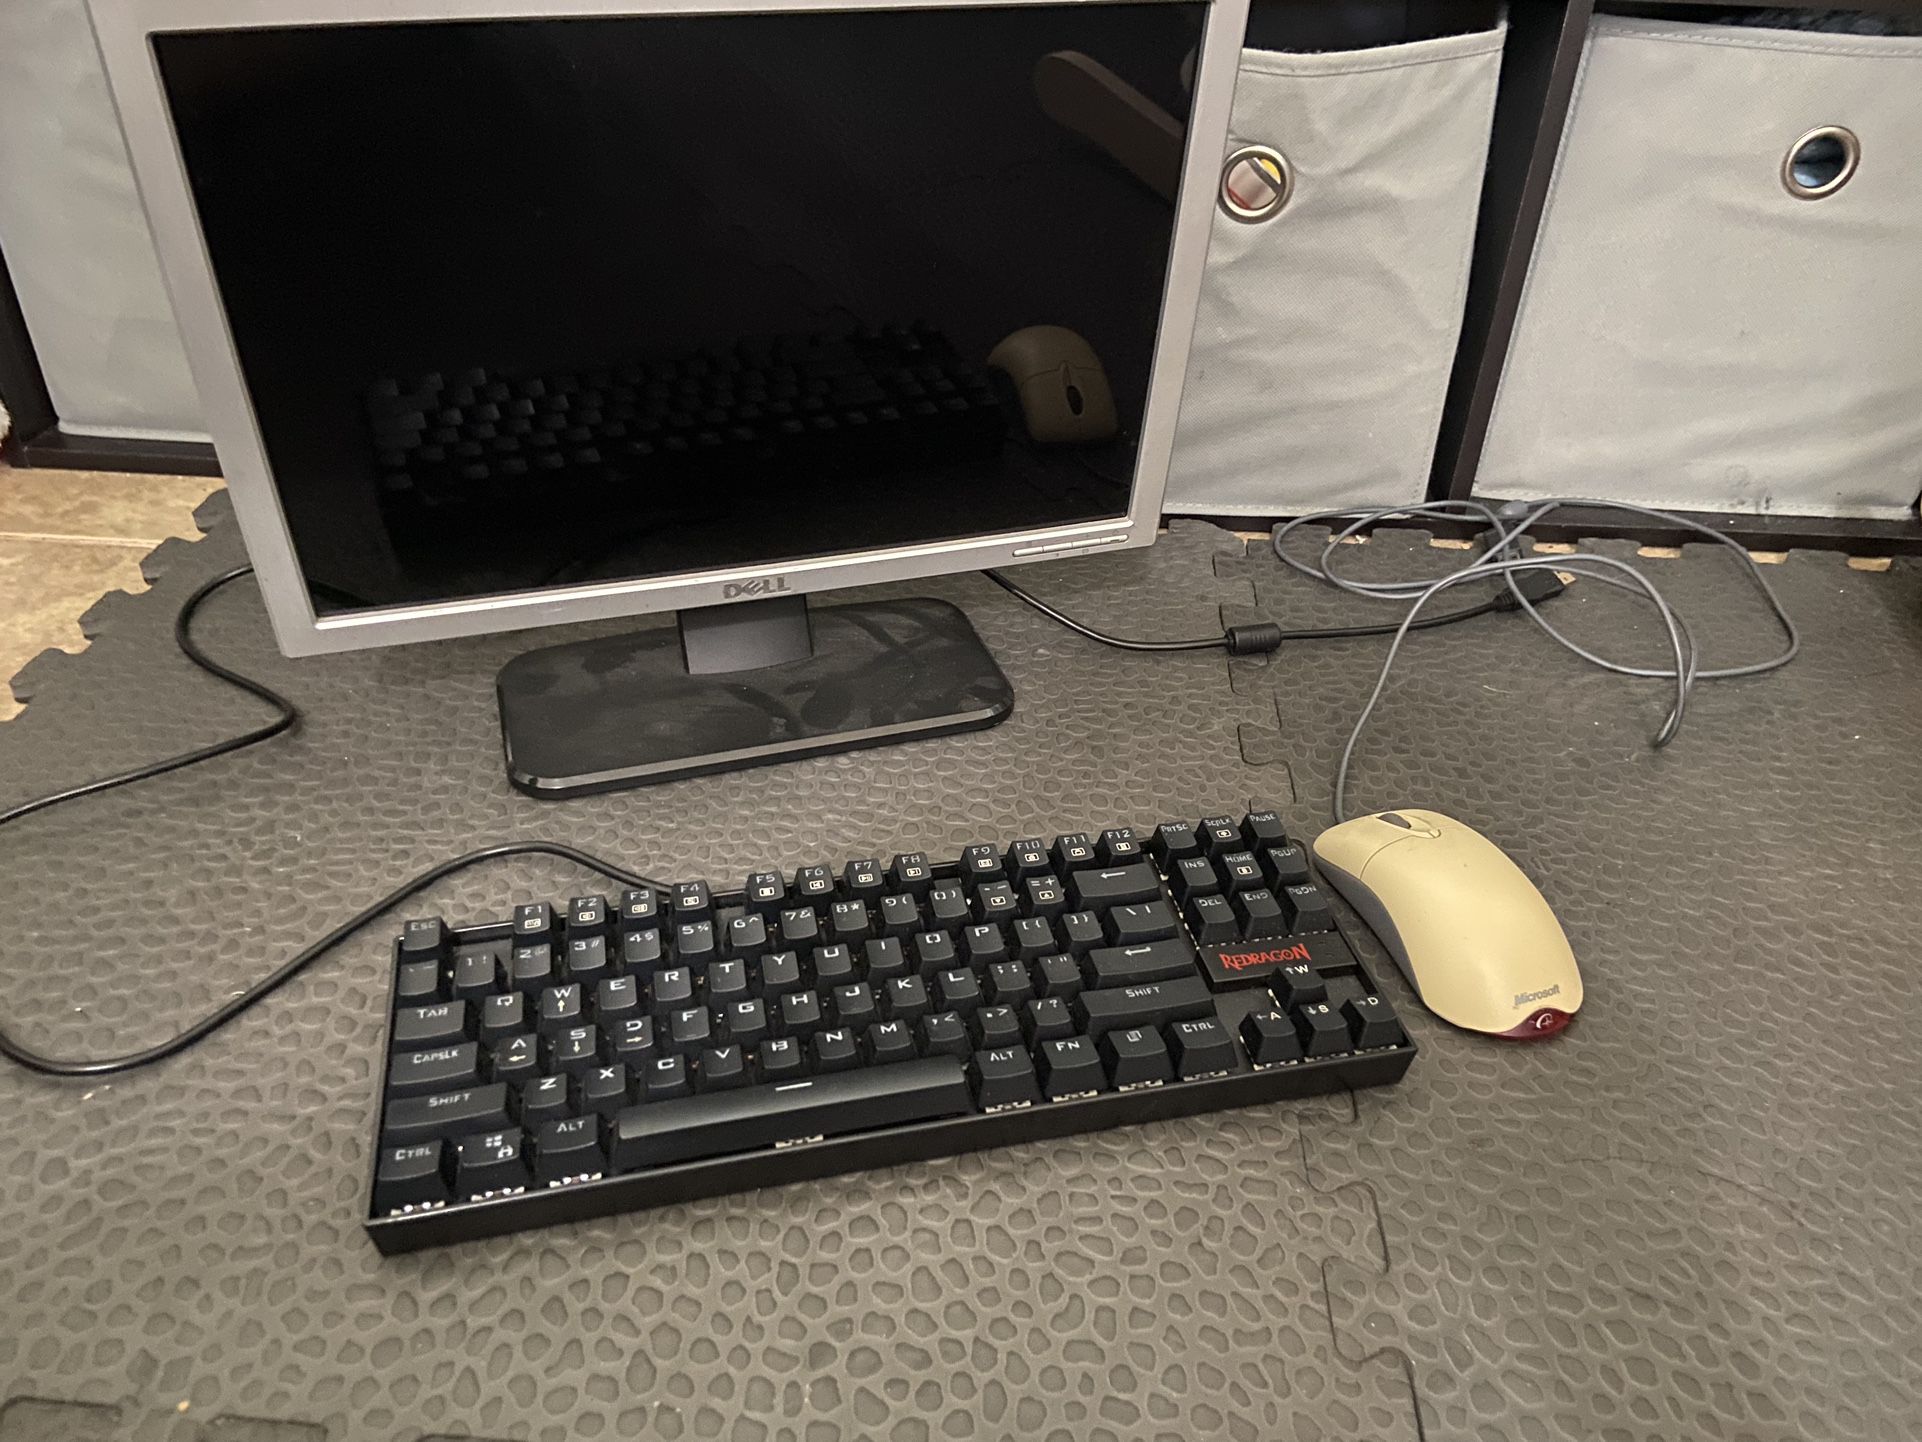 Dell Monitor, Red Dragon K552, Vintage Microsoft Mouse